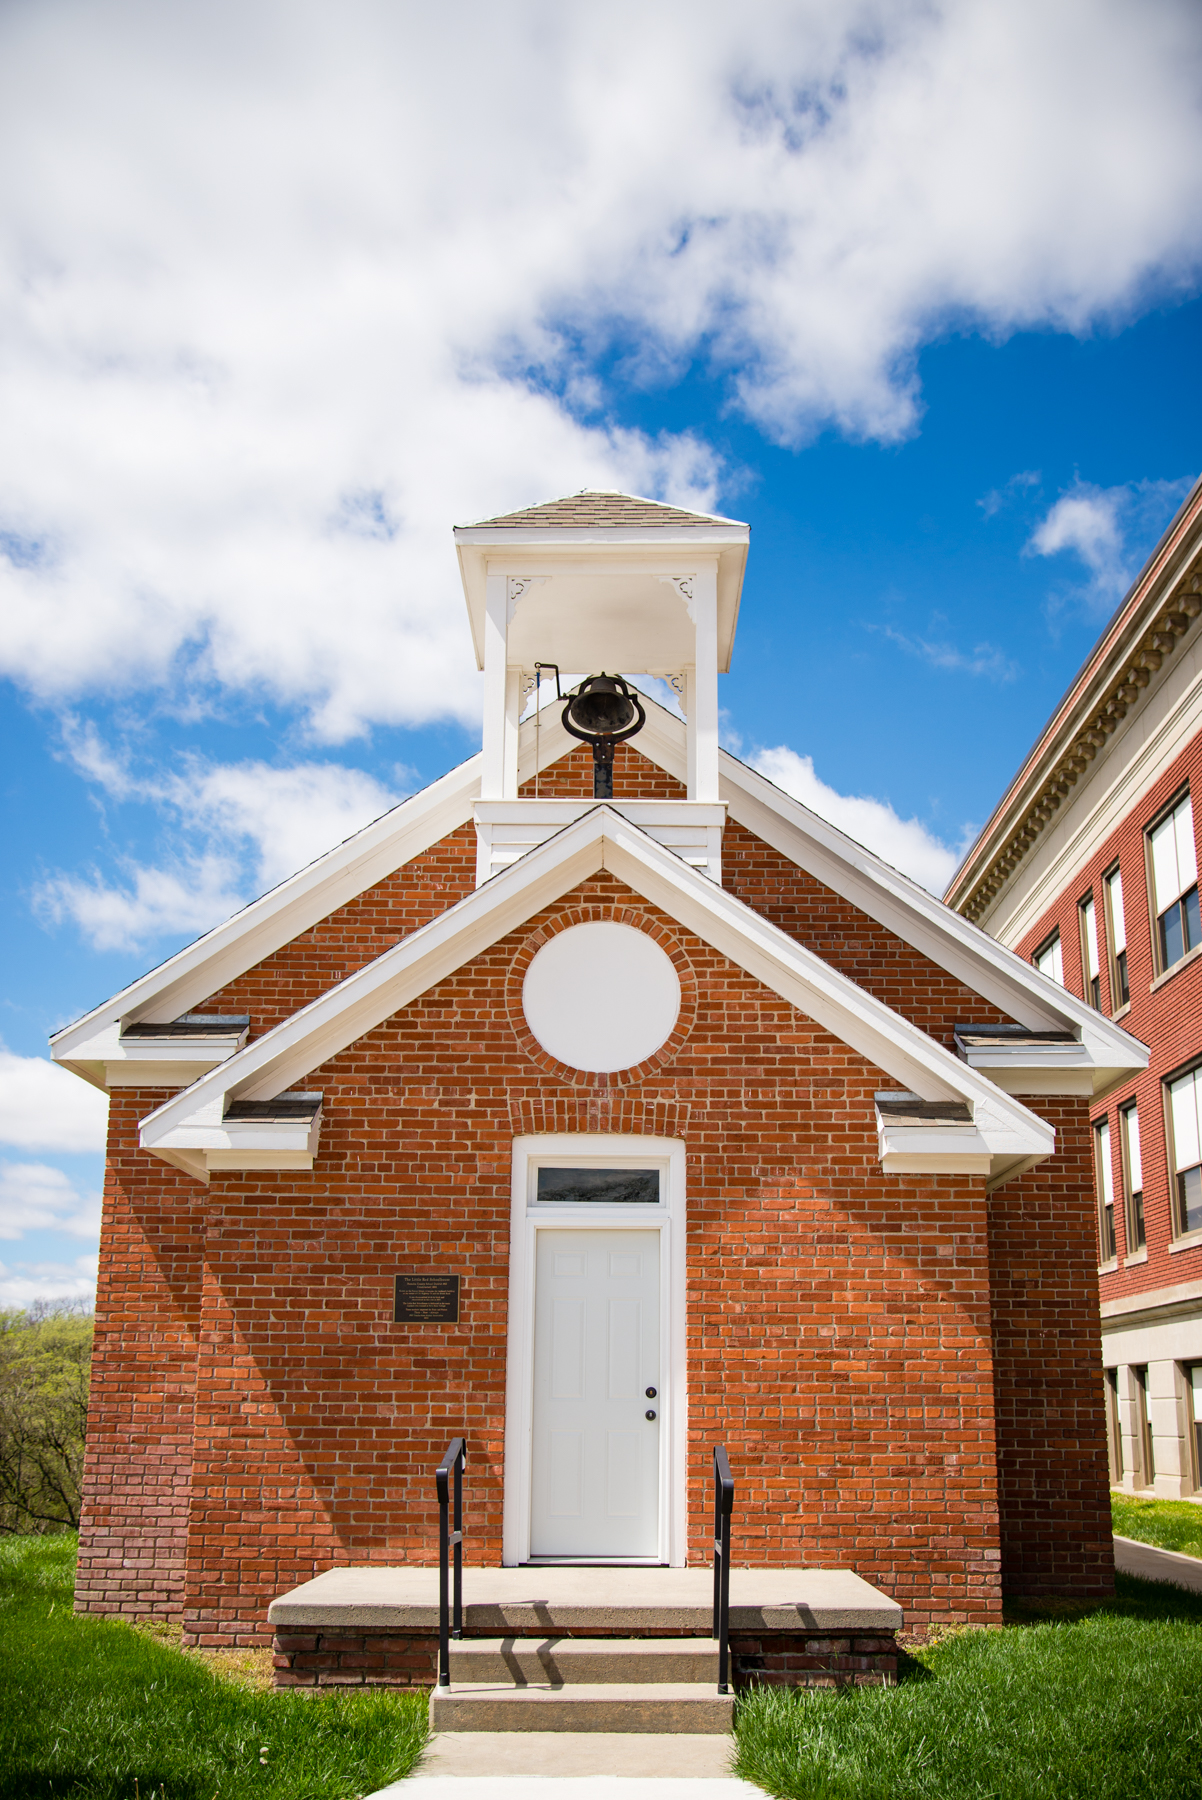 This is an exterior shot of the Visitor Center, also known as the Little Red Schoolhouse. The Visitor Center is located between AV Larson and TJ Majors buildings.